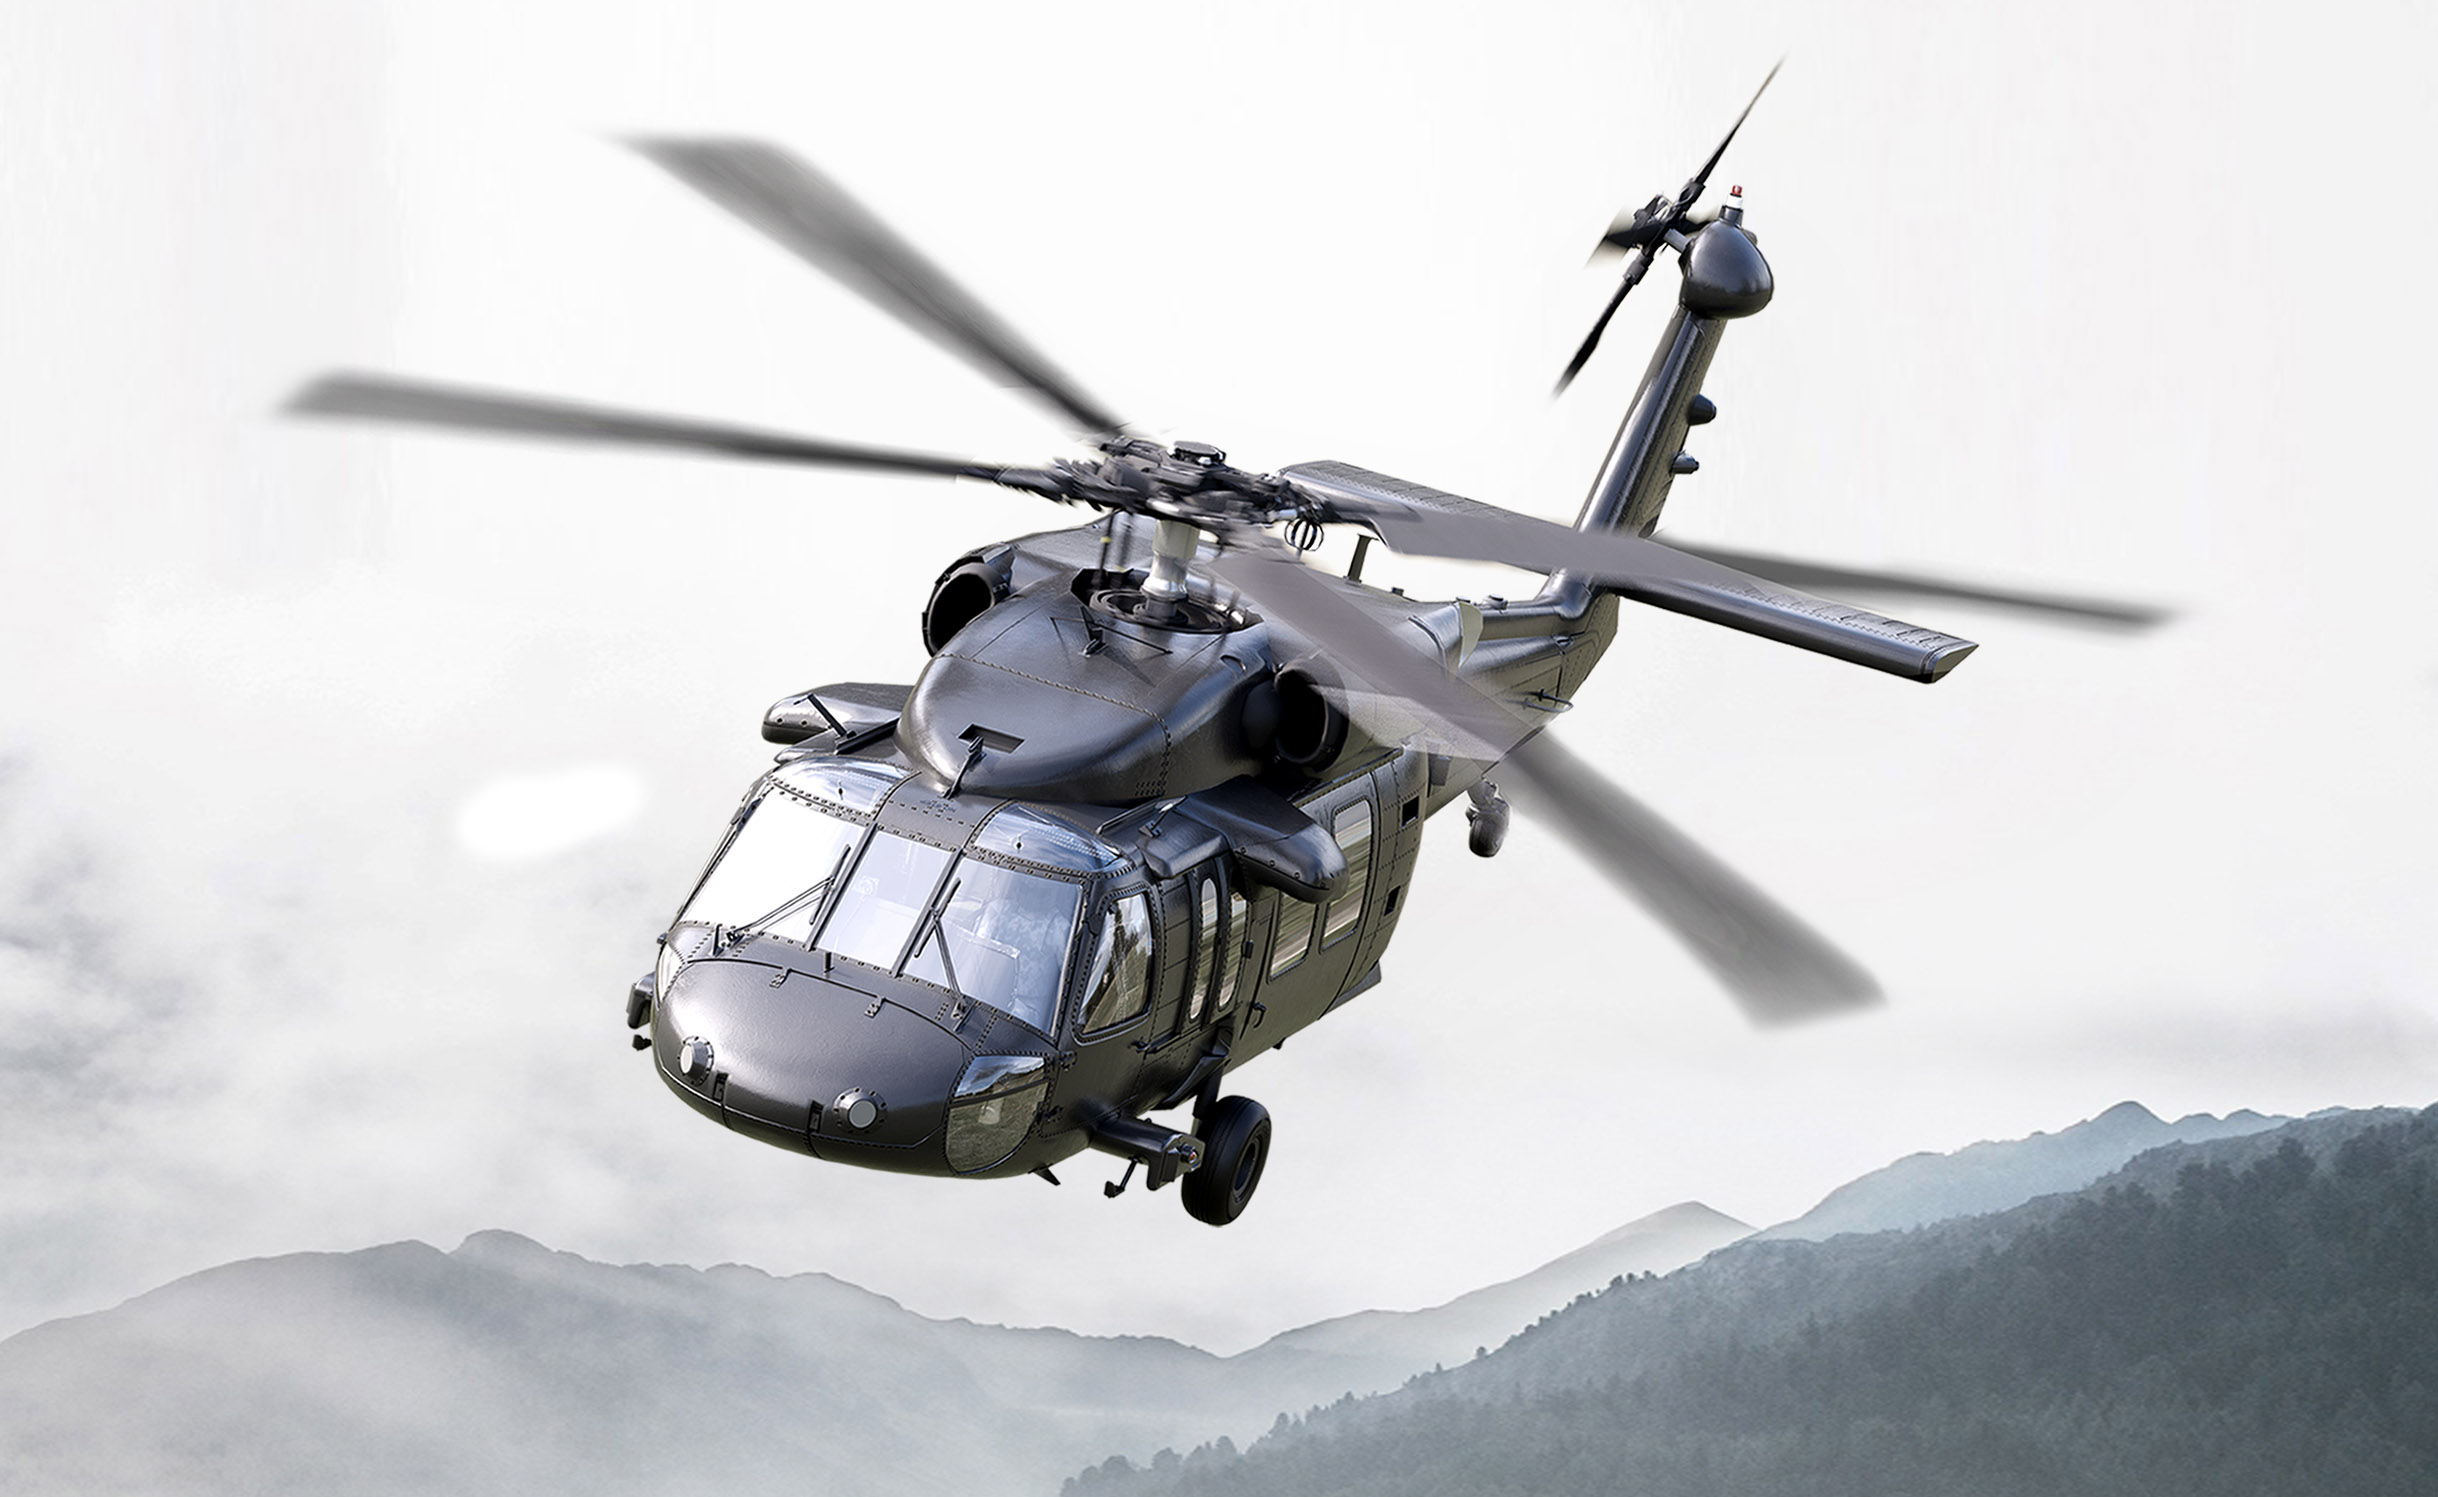 The European-built Black Hawk helicopter. Lockheed Martin outlined its team of UK partners and the benefits of choosing the advanced, Sikorsky Black Hawk® helicopter to replace the UK’s aging mixed medium helicopter fleet. (Photo: Lockheed Martin)